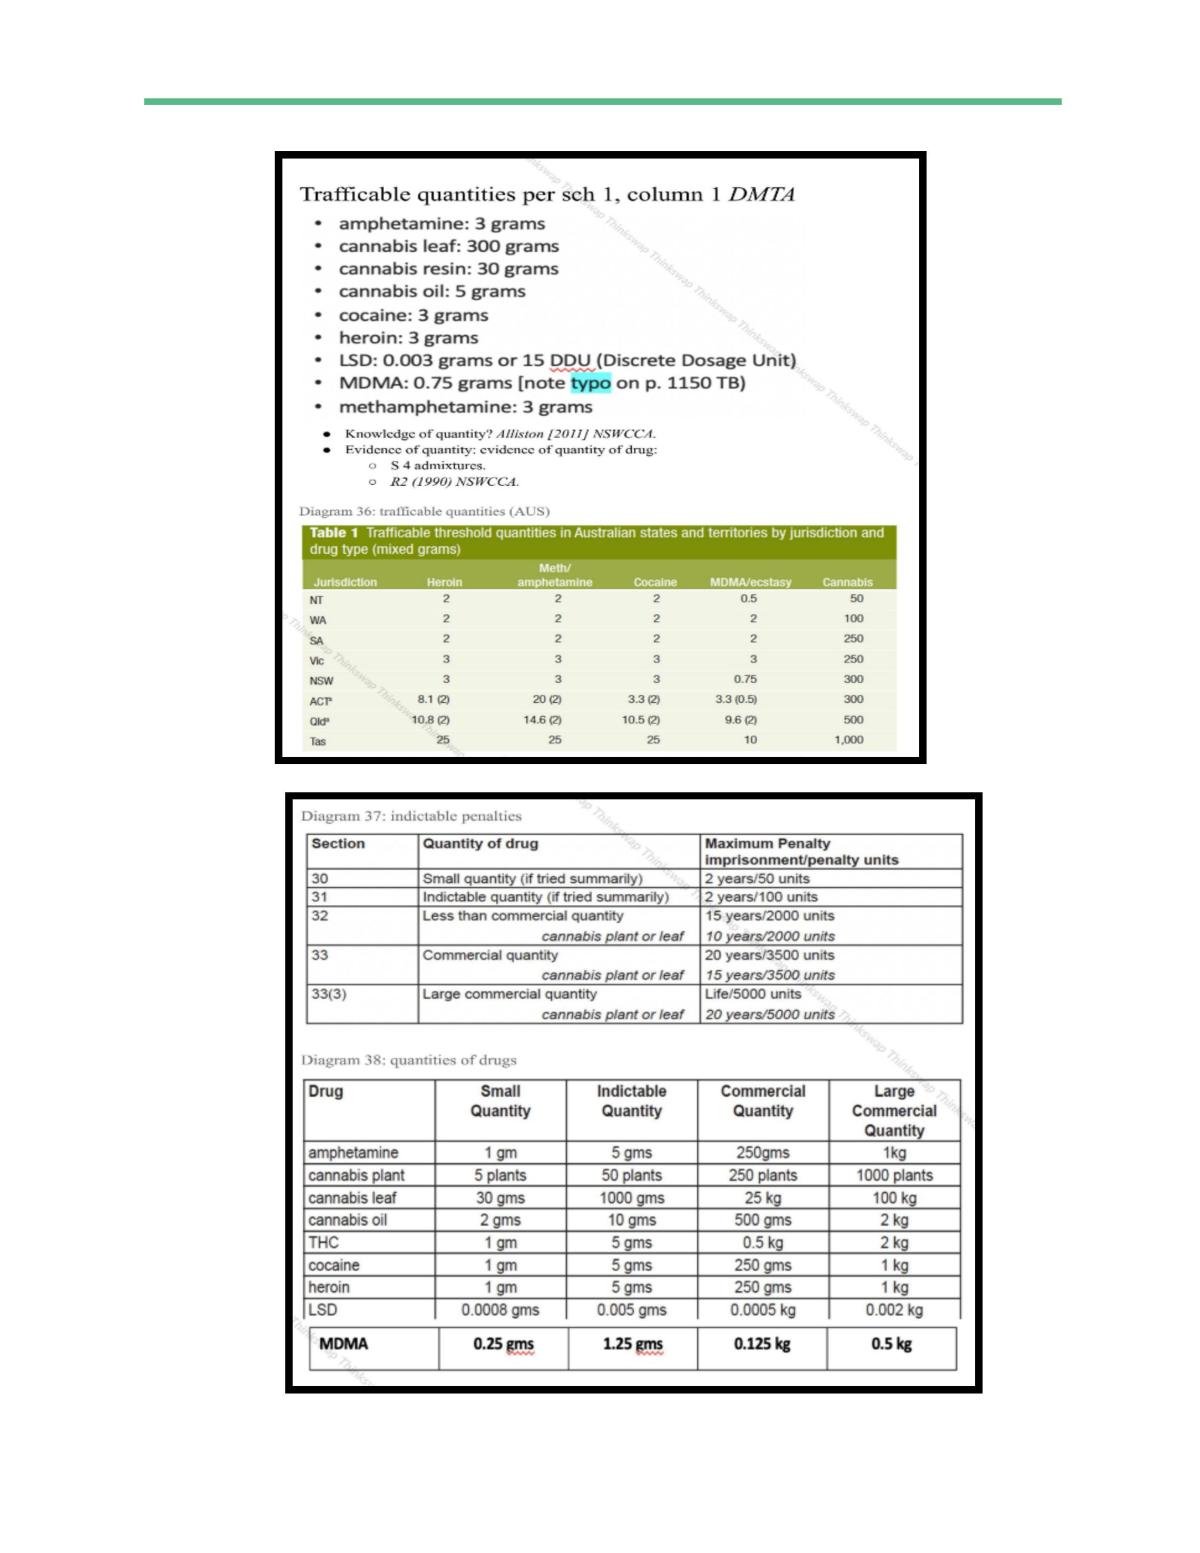 Complete Distinction Level Study Notes With Final Exam 10-Page Review of ALL Content - Page 55